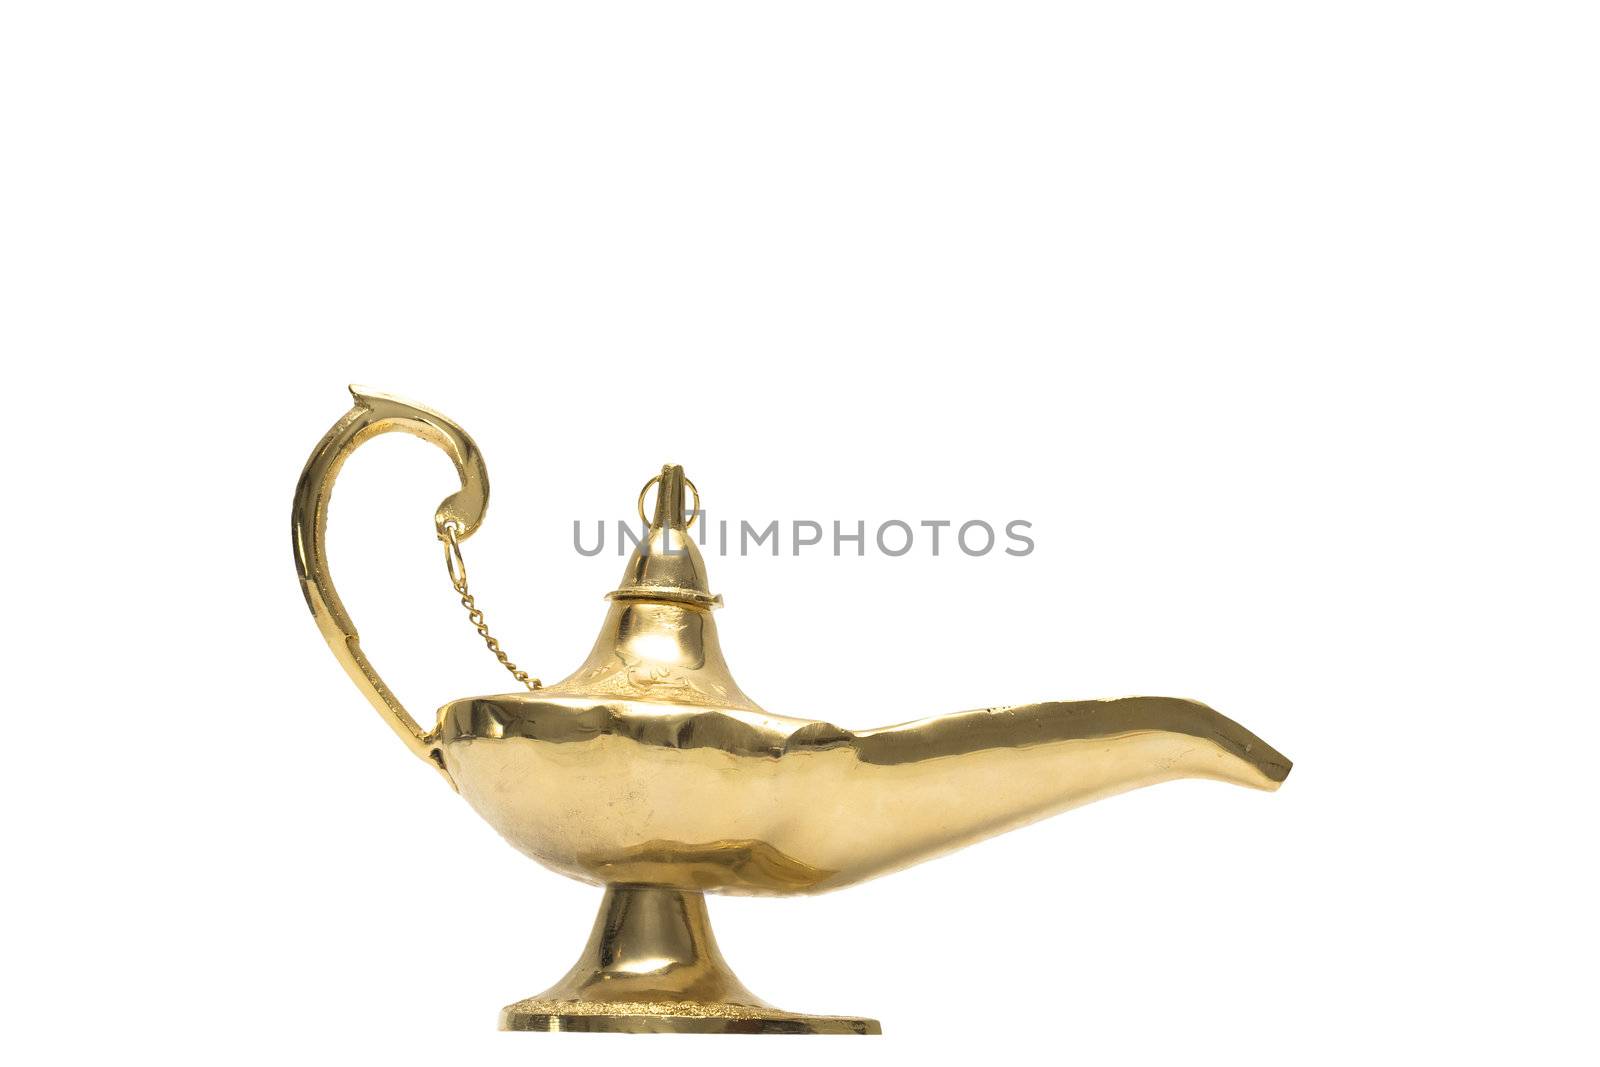 An arabic magic lamp, isolated on white.